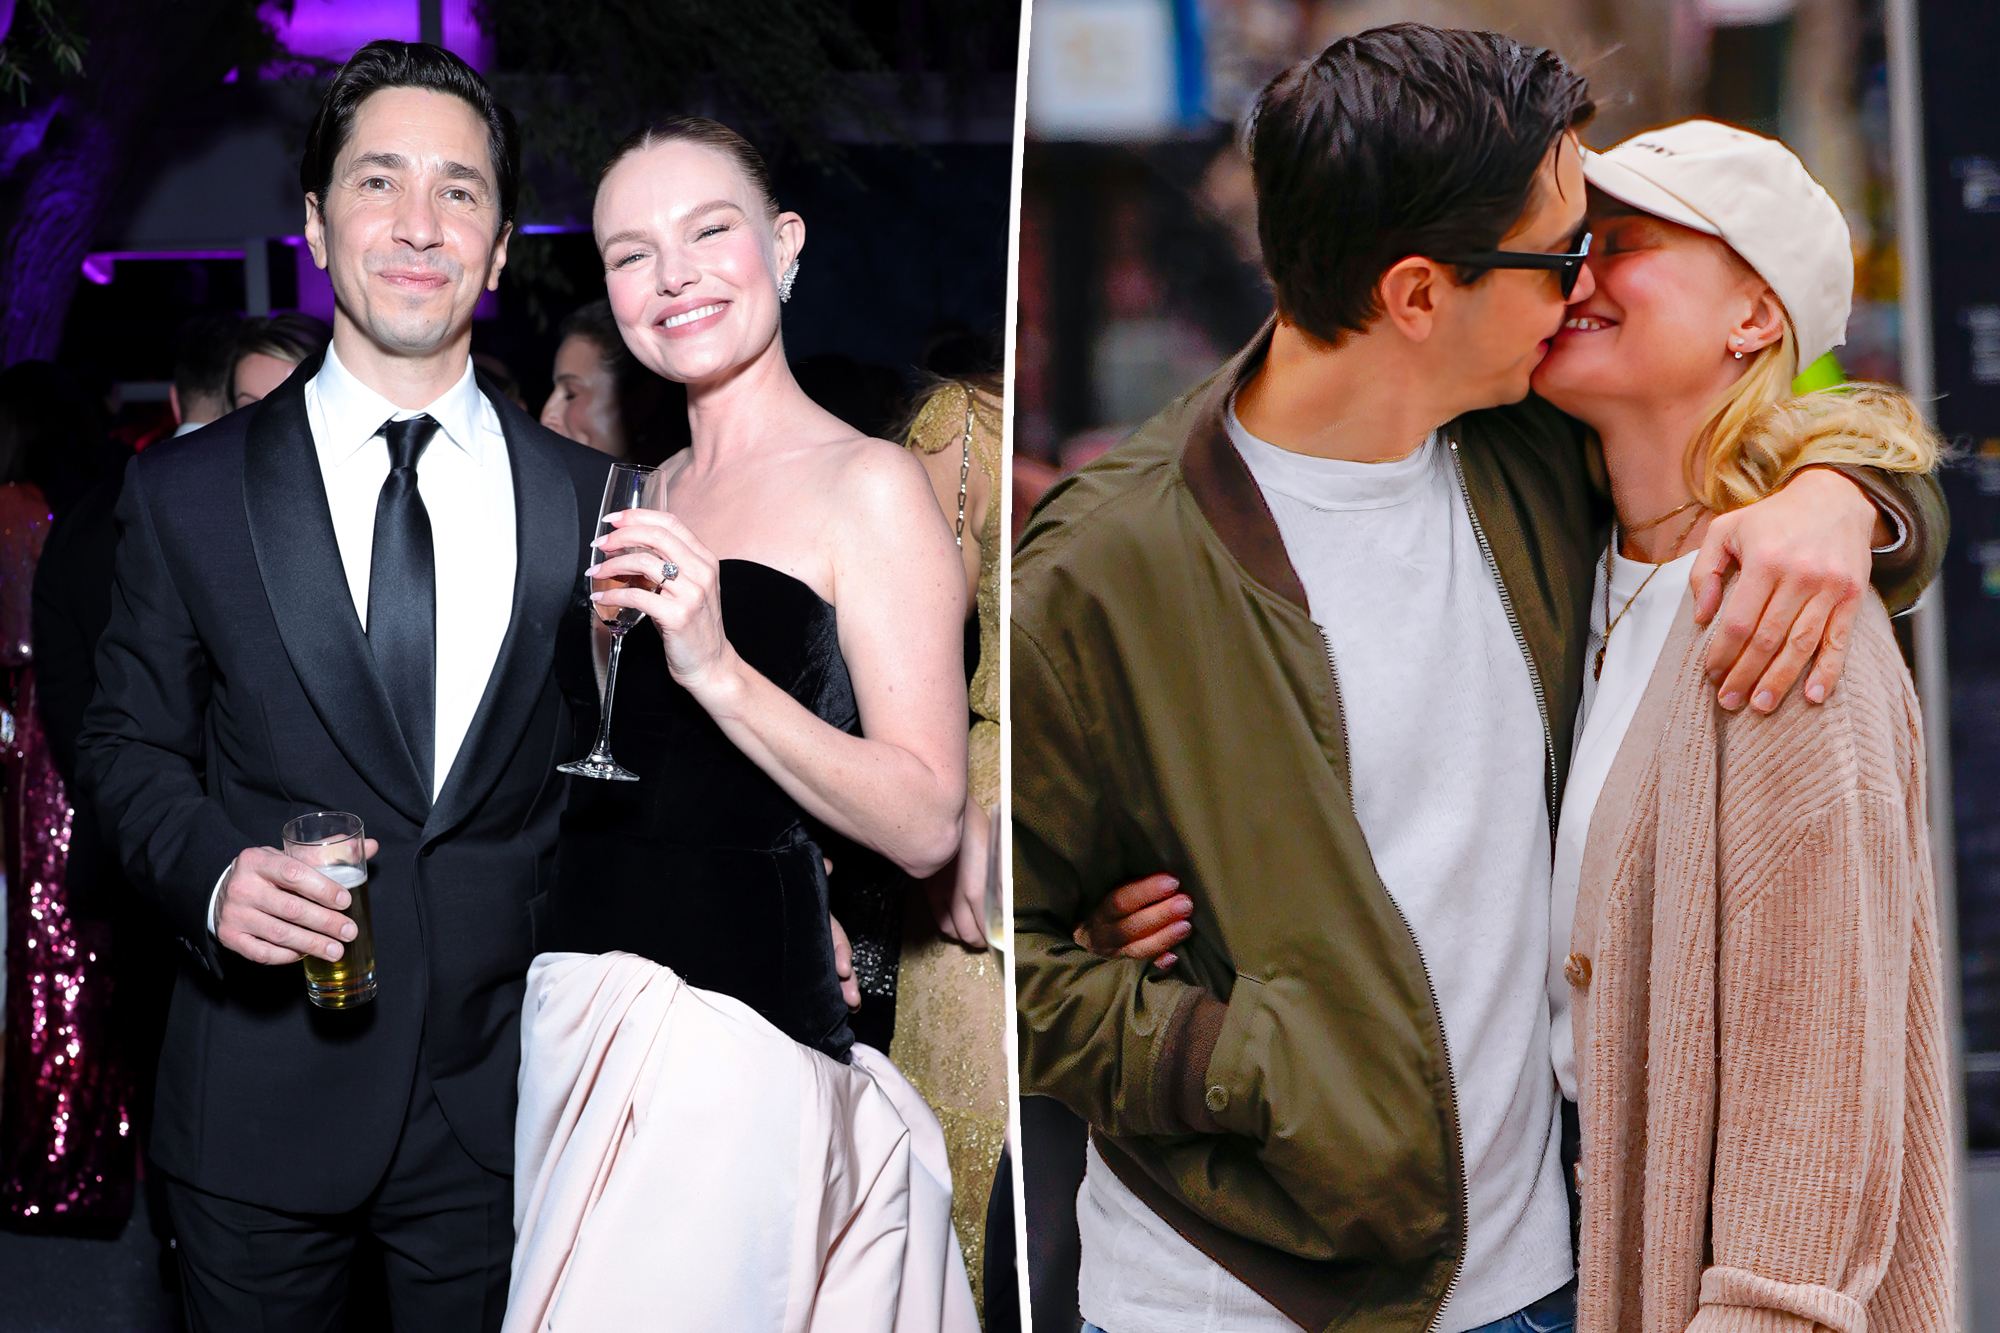 Shocking: Justin Long Reveals Embarrassing Incident with Kate Bosworth in Bed